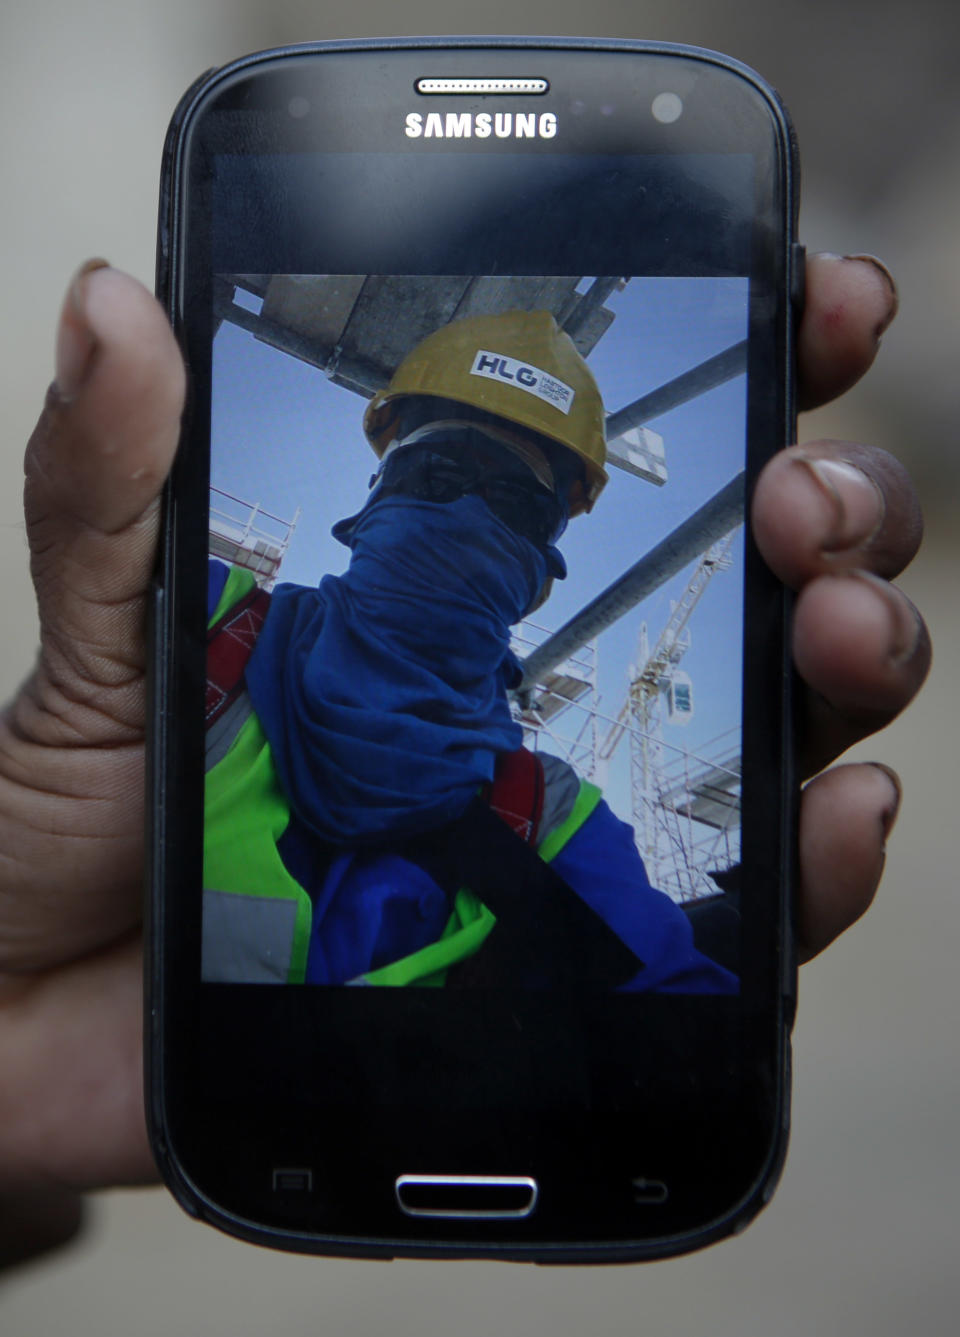 In this Wednesday, Nov. 30, 2016, Saro Kumari Mandal, 26, holds a mobile phone displaying a selfie her husband Balkisun Mandal Khatwe had taken in Qatar in his yellow work hardhat and protective sunglasses, at her village in Belhi, Saptari District of Nepal. Saro had chatted with Balkisun through Facebook Messenger just the evening before his death. This is what happened, according to his supervisor: "After work he went to dinner at 7 and bed at 10. In the morning we tried to wake him up but he didn't respond. We took the body to the hospital where they did an autopsy and said it was cardiac arrest." About 10 percent of Nepal's 28 million residents are working abroad. They send back more than $6 billion a year, amounting to about 30 percent of the country's annual revenues. Only Tajikistan and Kyrgyzstan are more dependent on foreign earnings. (AP Photo/Niranjan Shrestha)